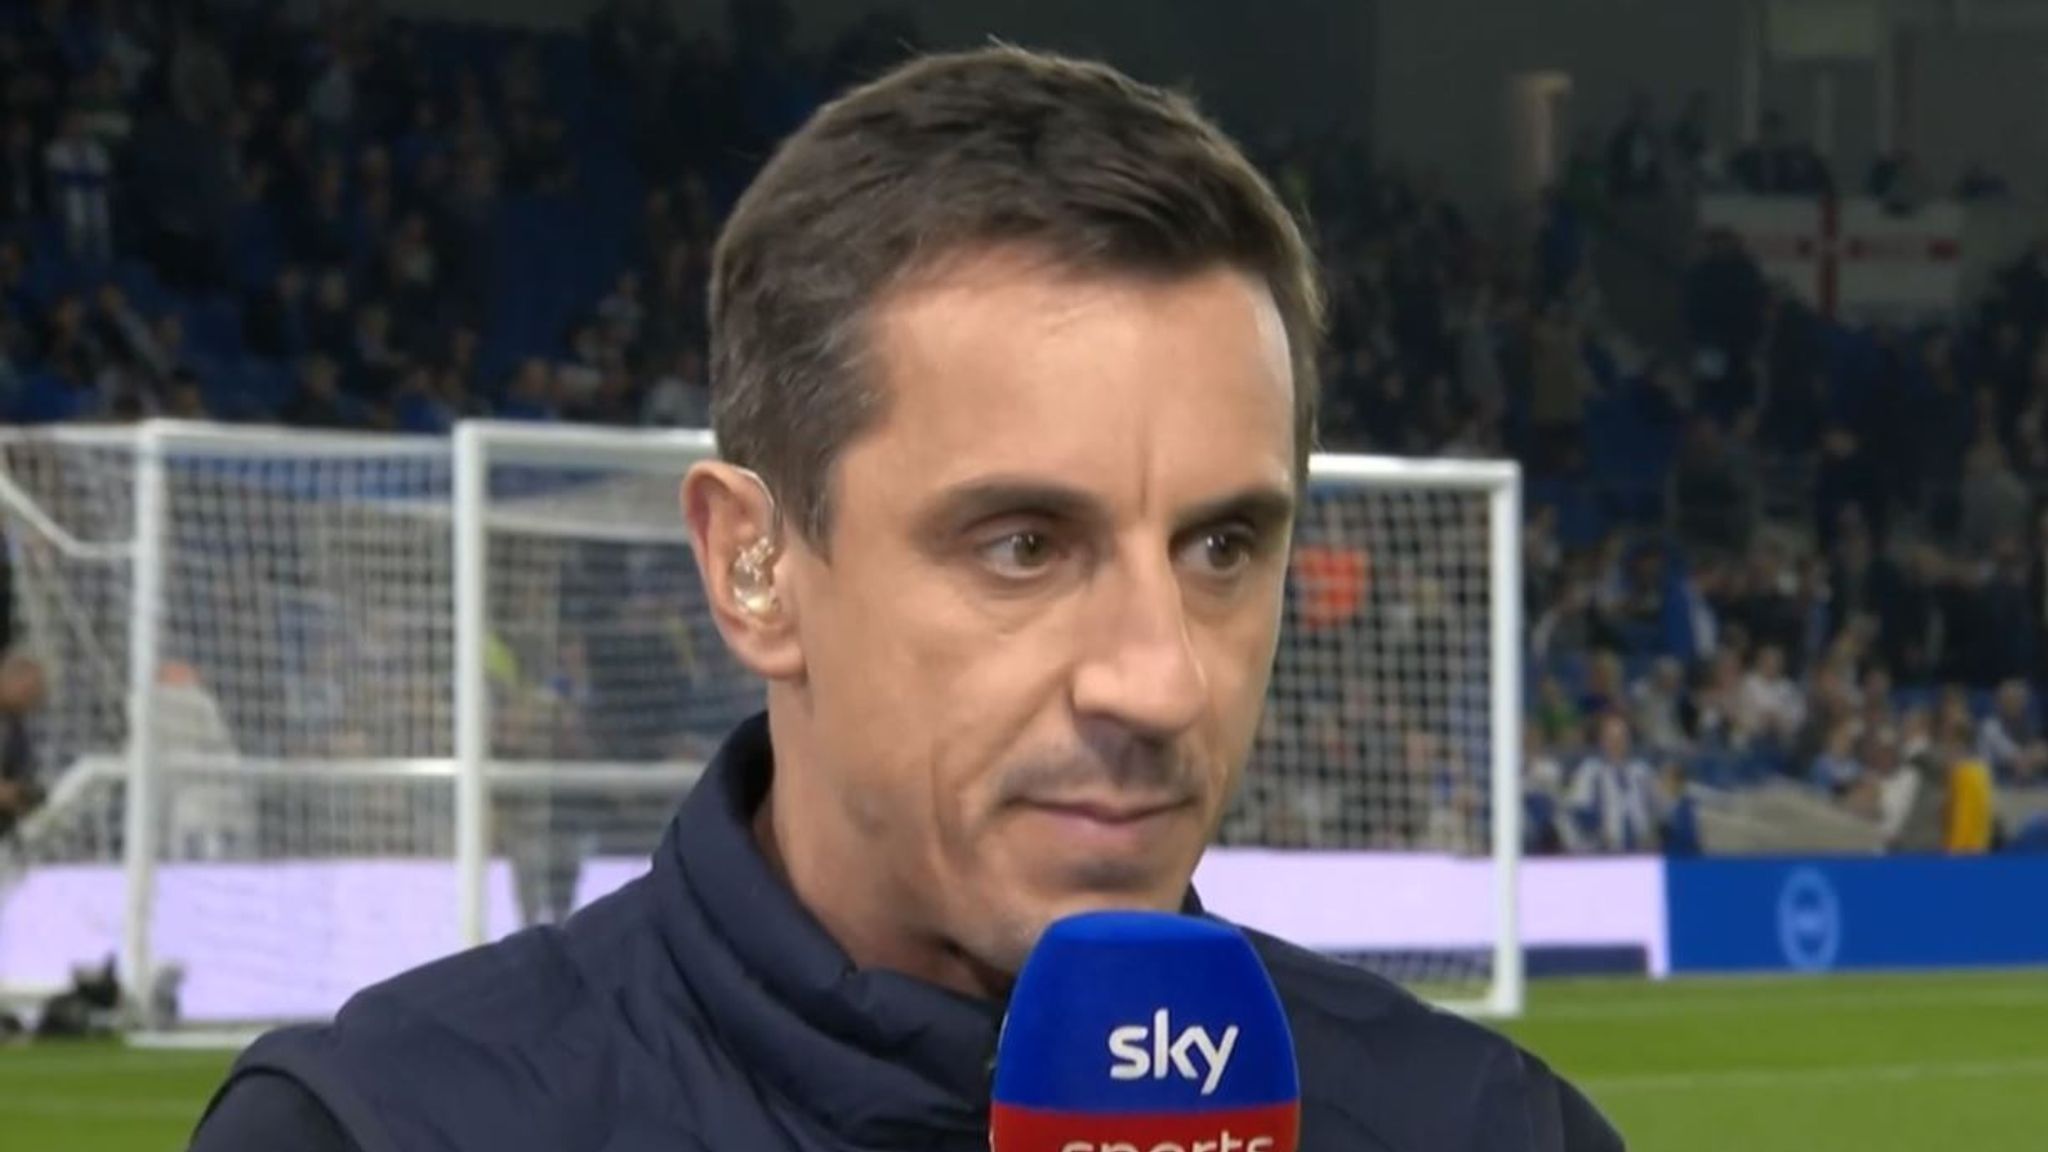 Gary Neville points fingers at Manchester United's players ... Claims to know who is leaking information within the team